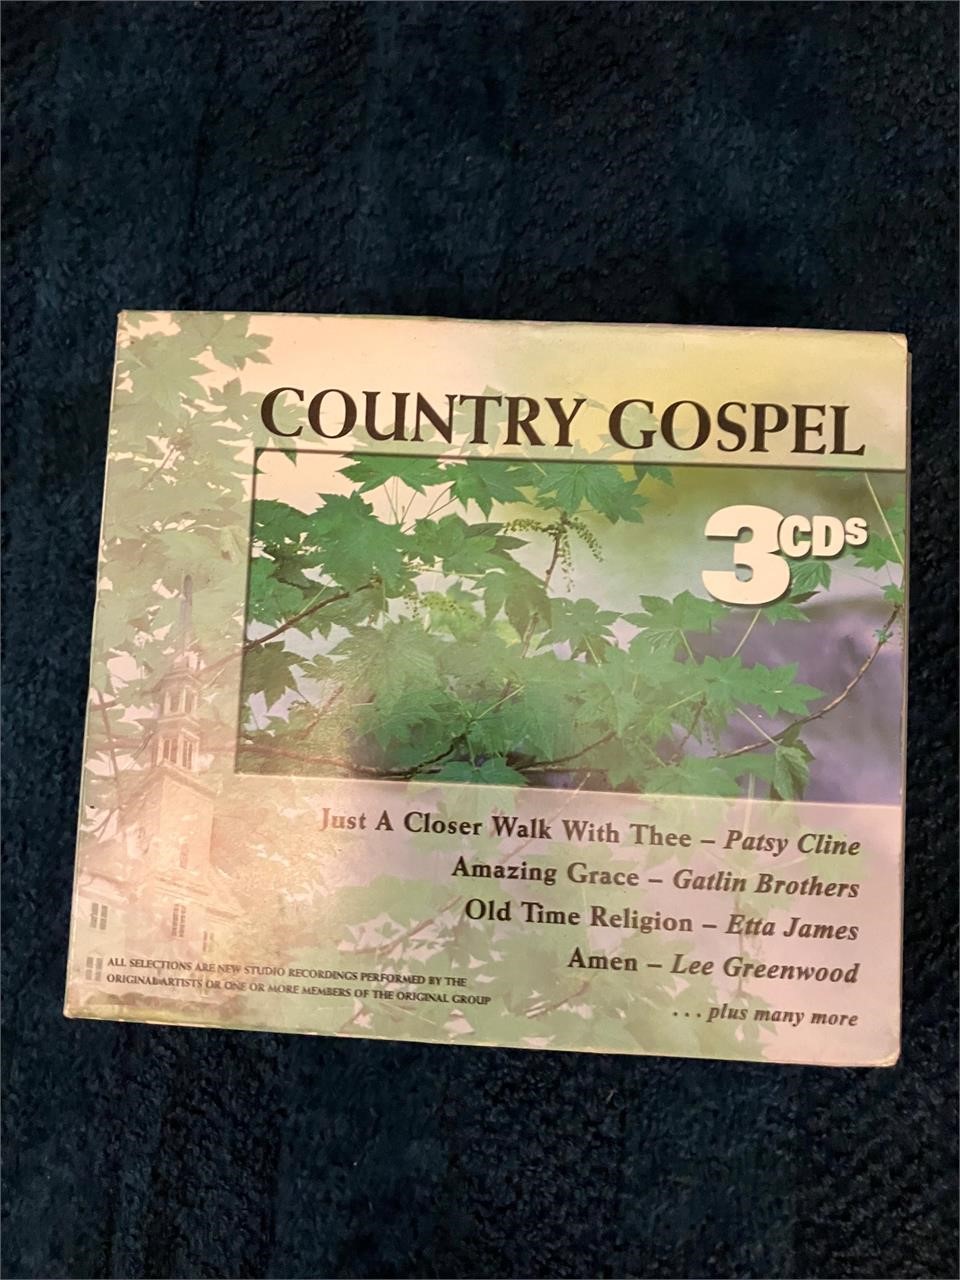 3 CDs country gospel, Patsy Cline, Lee Greenwood,